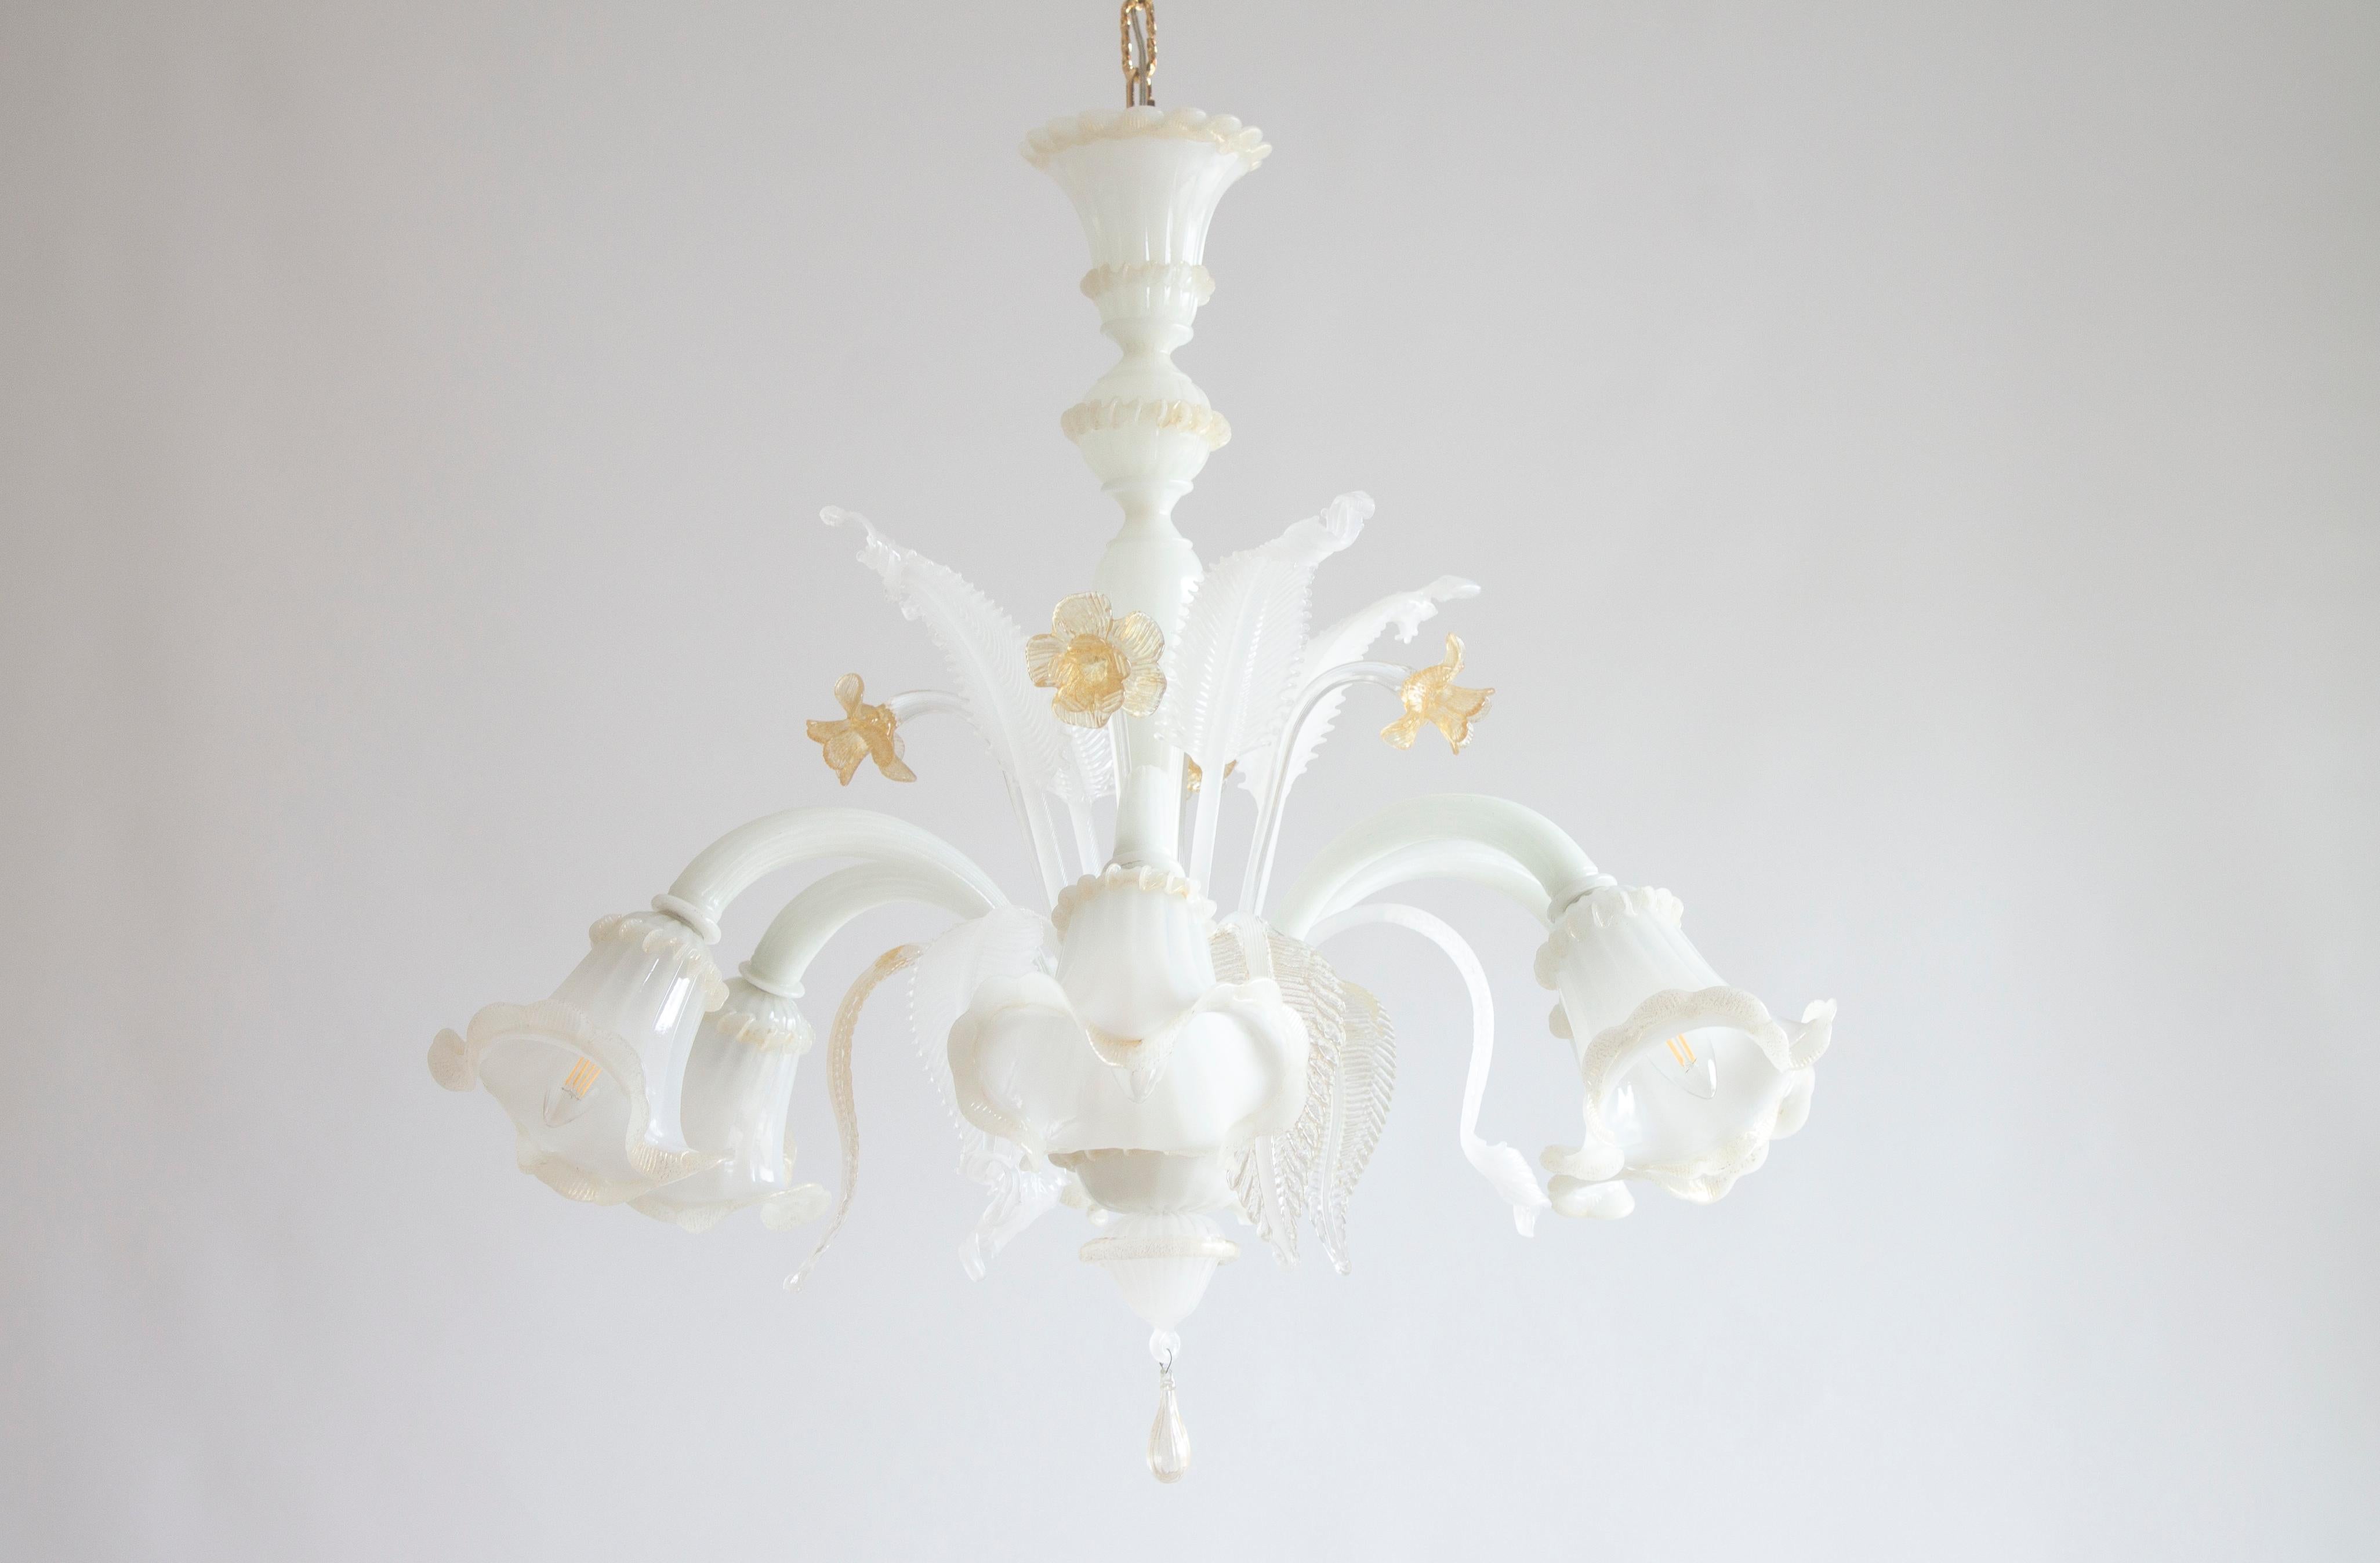 Elegant 20th century floral chandelier in silk-and-amber-colored Murano glass, with gold finishes, Italy.
This refined chandelier, handcrafted in the Italian island of Murano, stands out for its colorful floral decorations embellished with gold